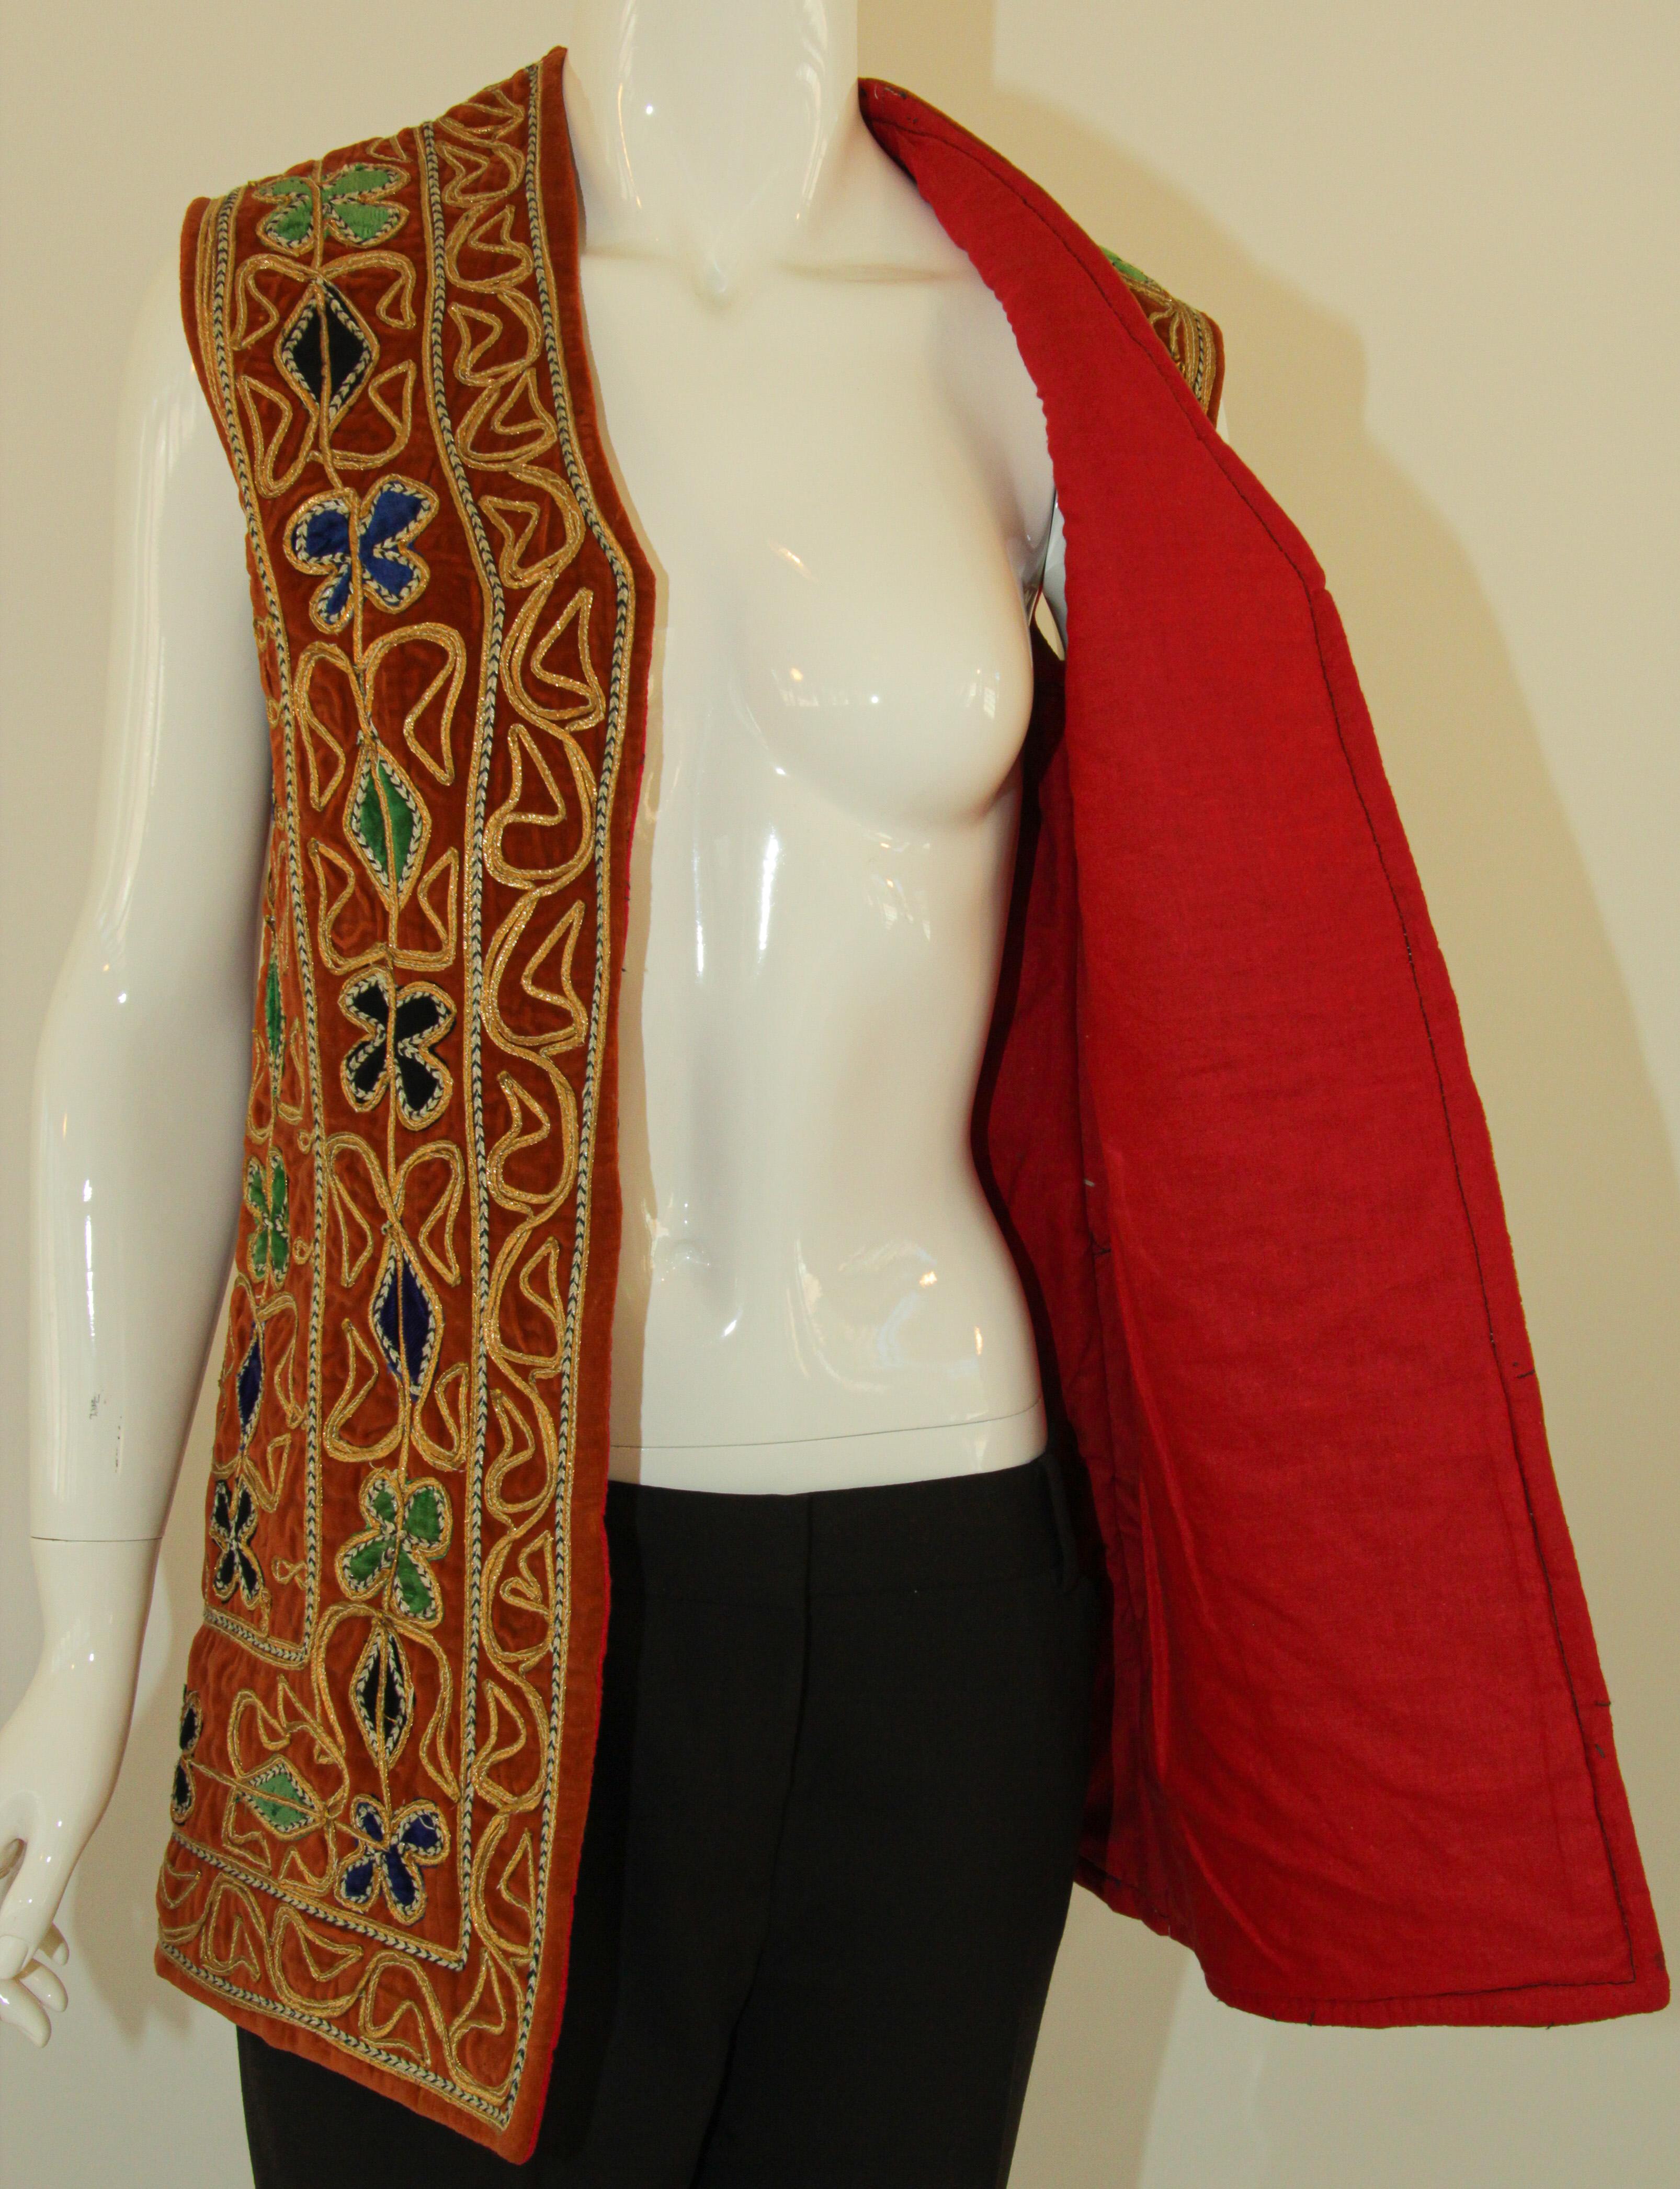 Vintage Vest Velvet Embroidered Asian Ethnic Boho Chic Jacket 1970's In Good Condition For Sale In North Hollywood, CA